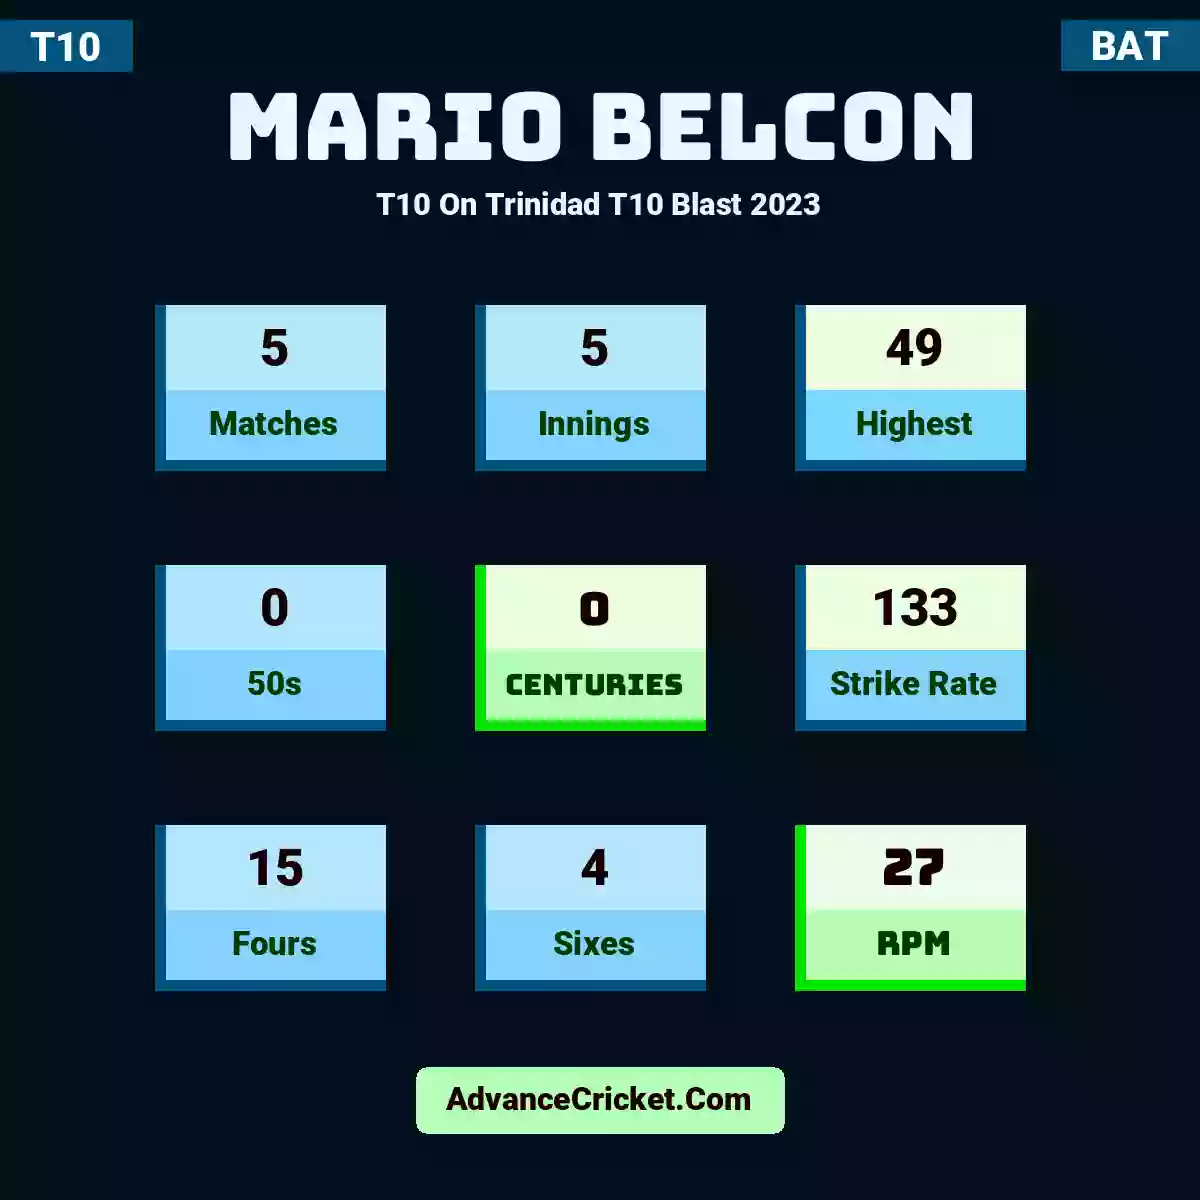 Mario Belcon T10  On Trinidad T10 Blast 2023, Mario Belcon played 5 matches, scored 49 runs as highest, 0 half-centuries, and 0 centuries, with a strike rate of 133. m.belcon hit 15 fours and 4 sixes, with an RPM of 27.